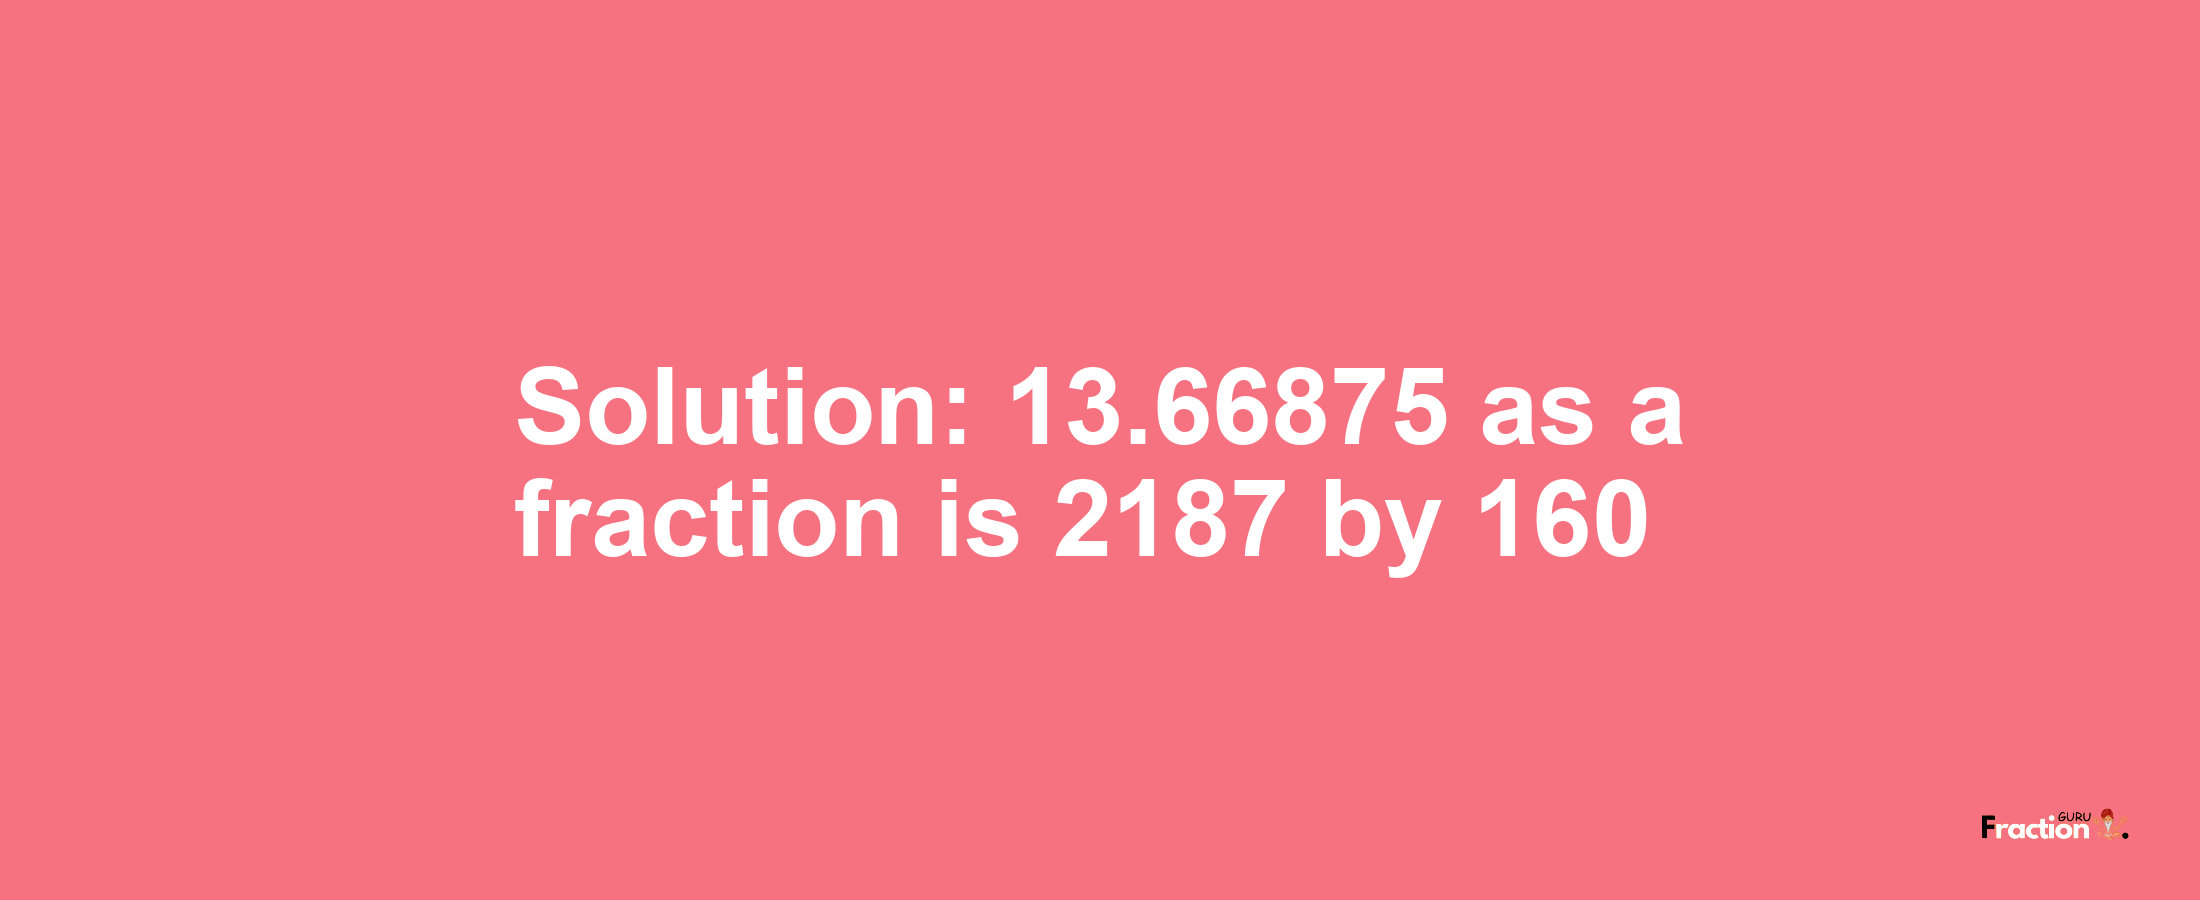 Solution:13.66875 as a fraction is 2187/160